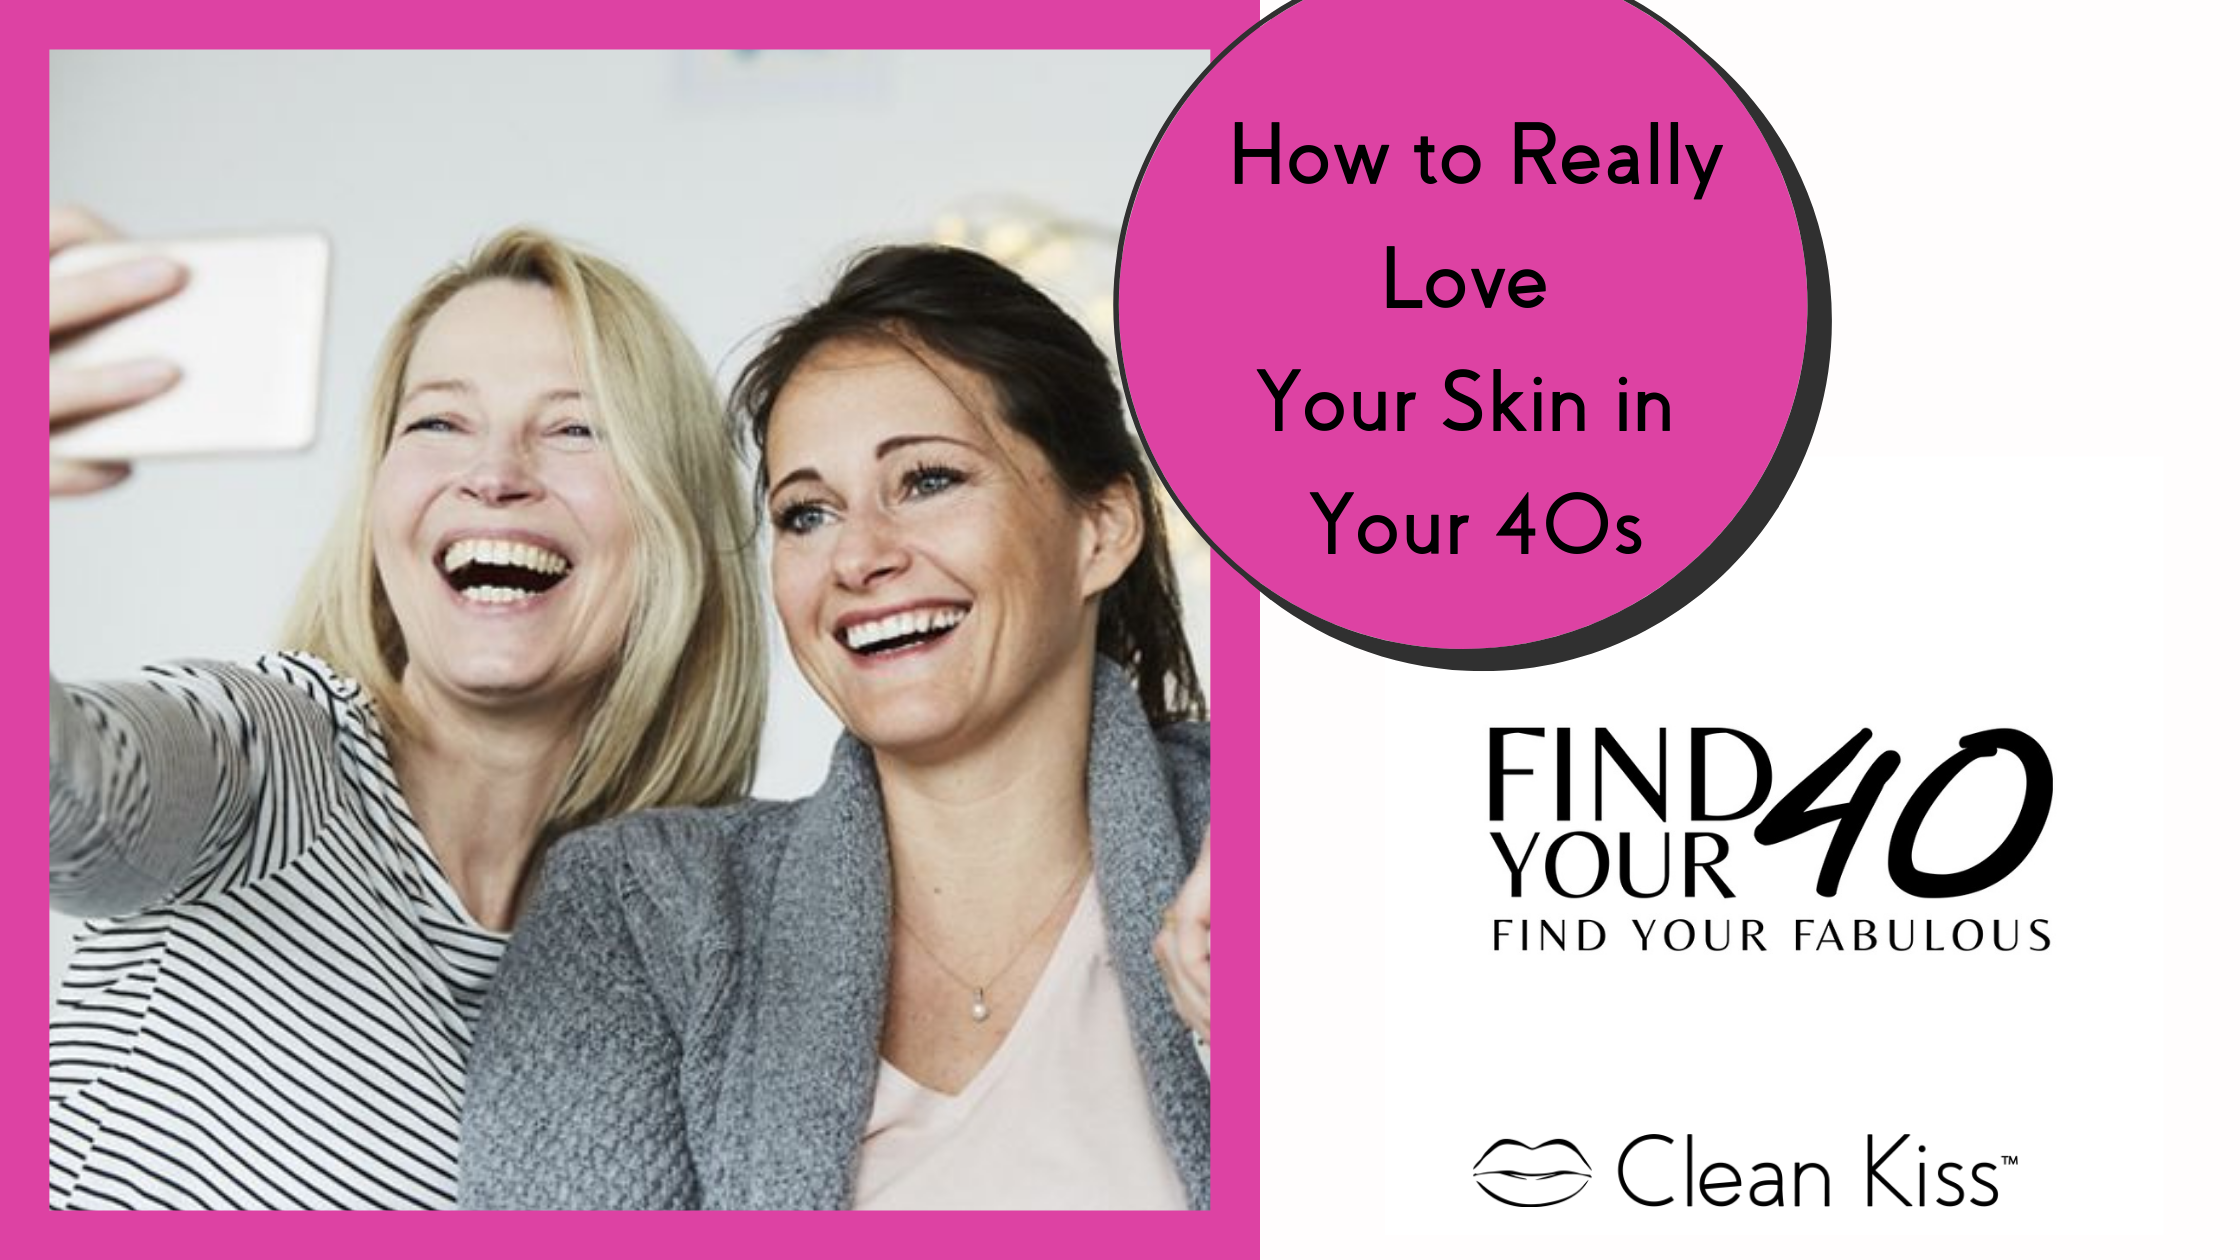 How To Really Love Your Skin in Your 40's